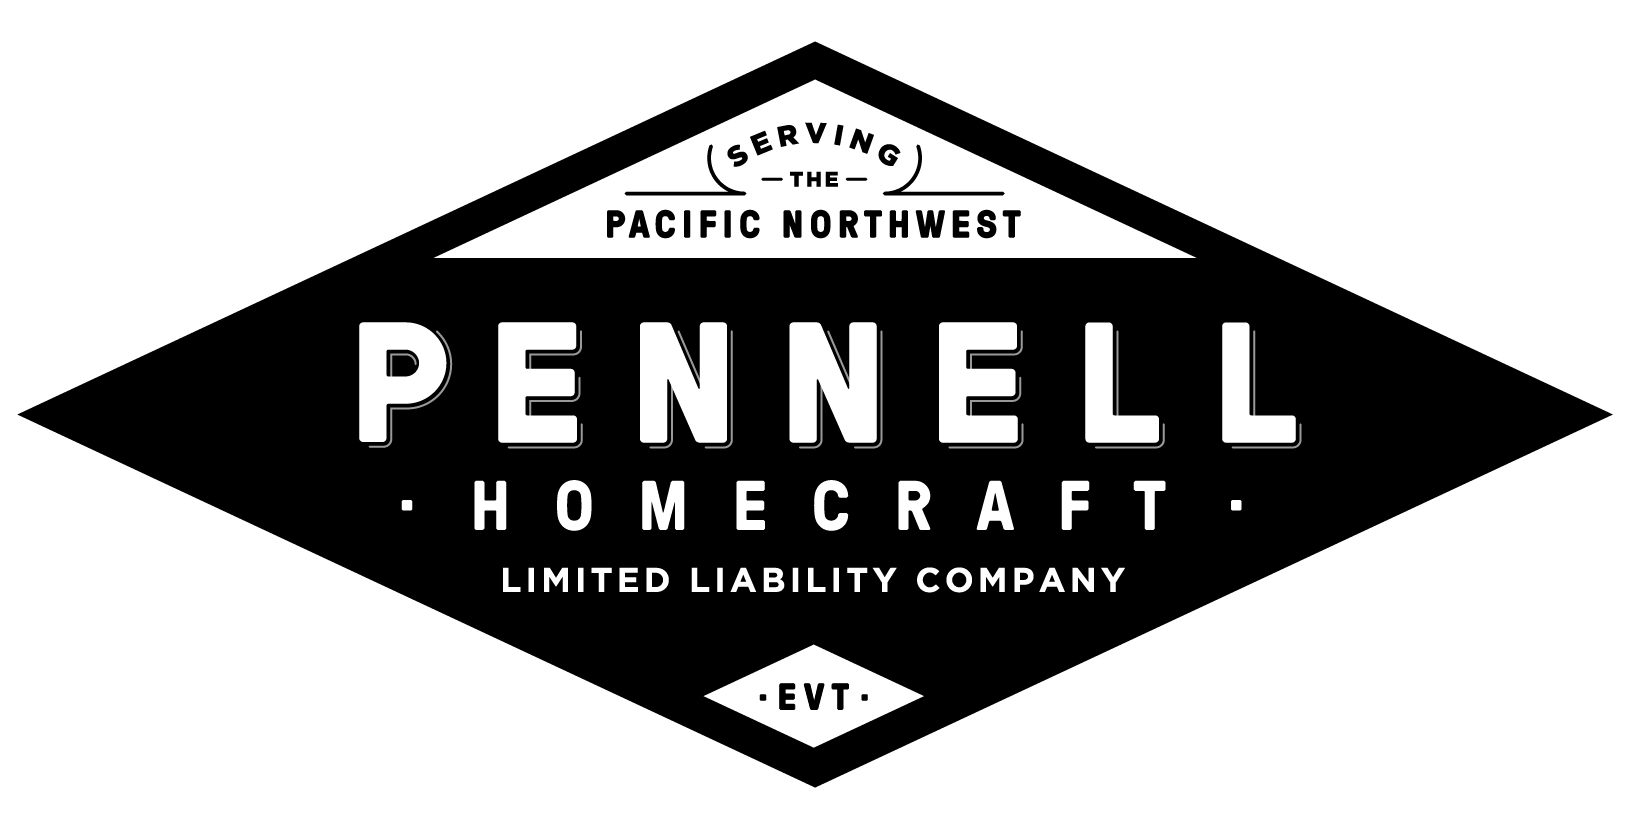 Pennell Home Craft